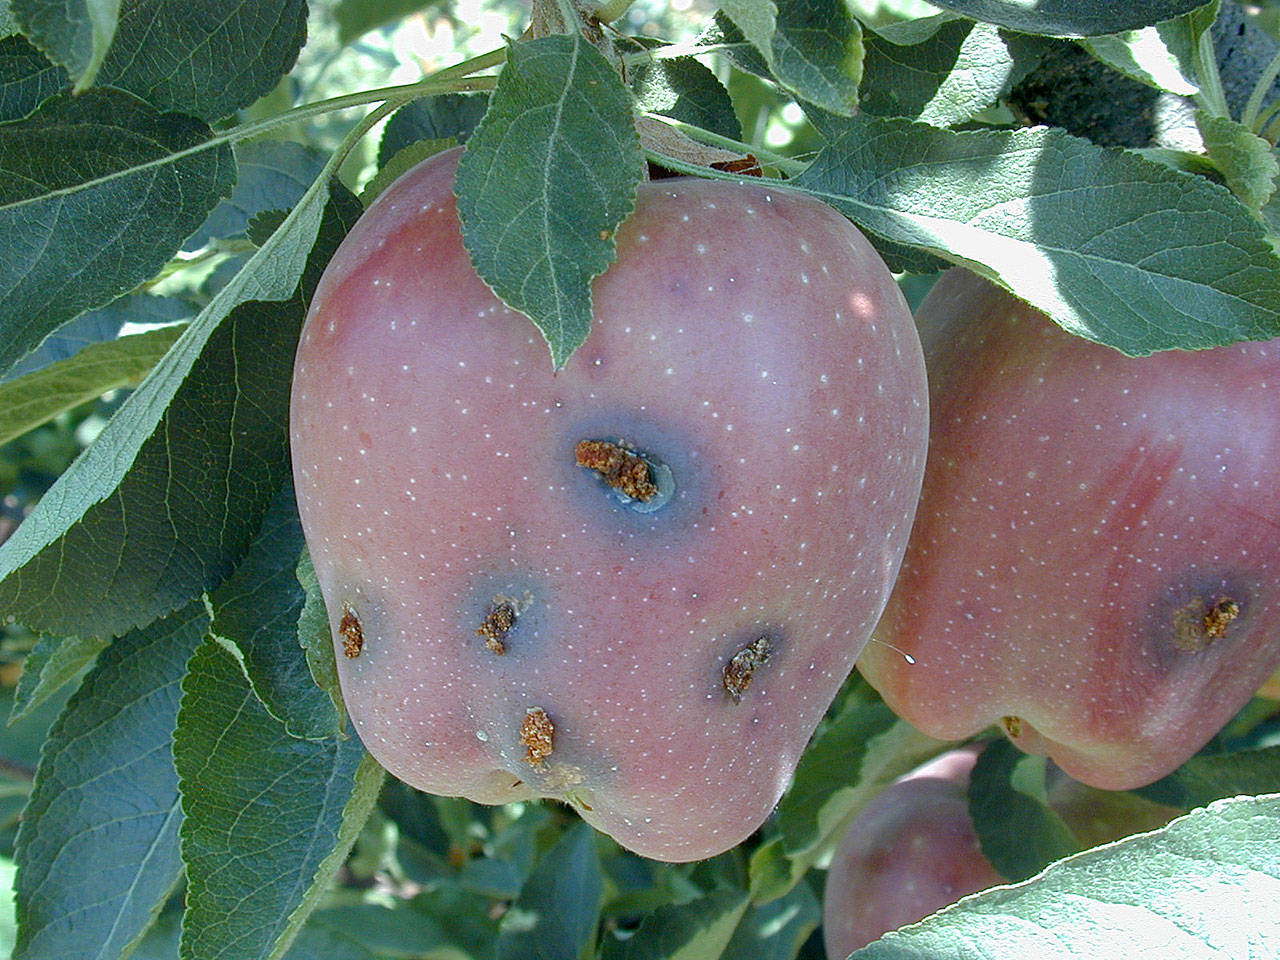 Get It Growing: The codling moth is a growing problem in Clallam County orchards